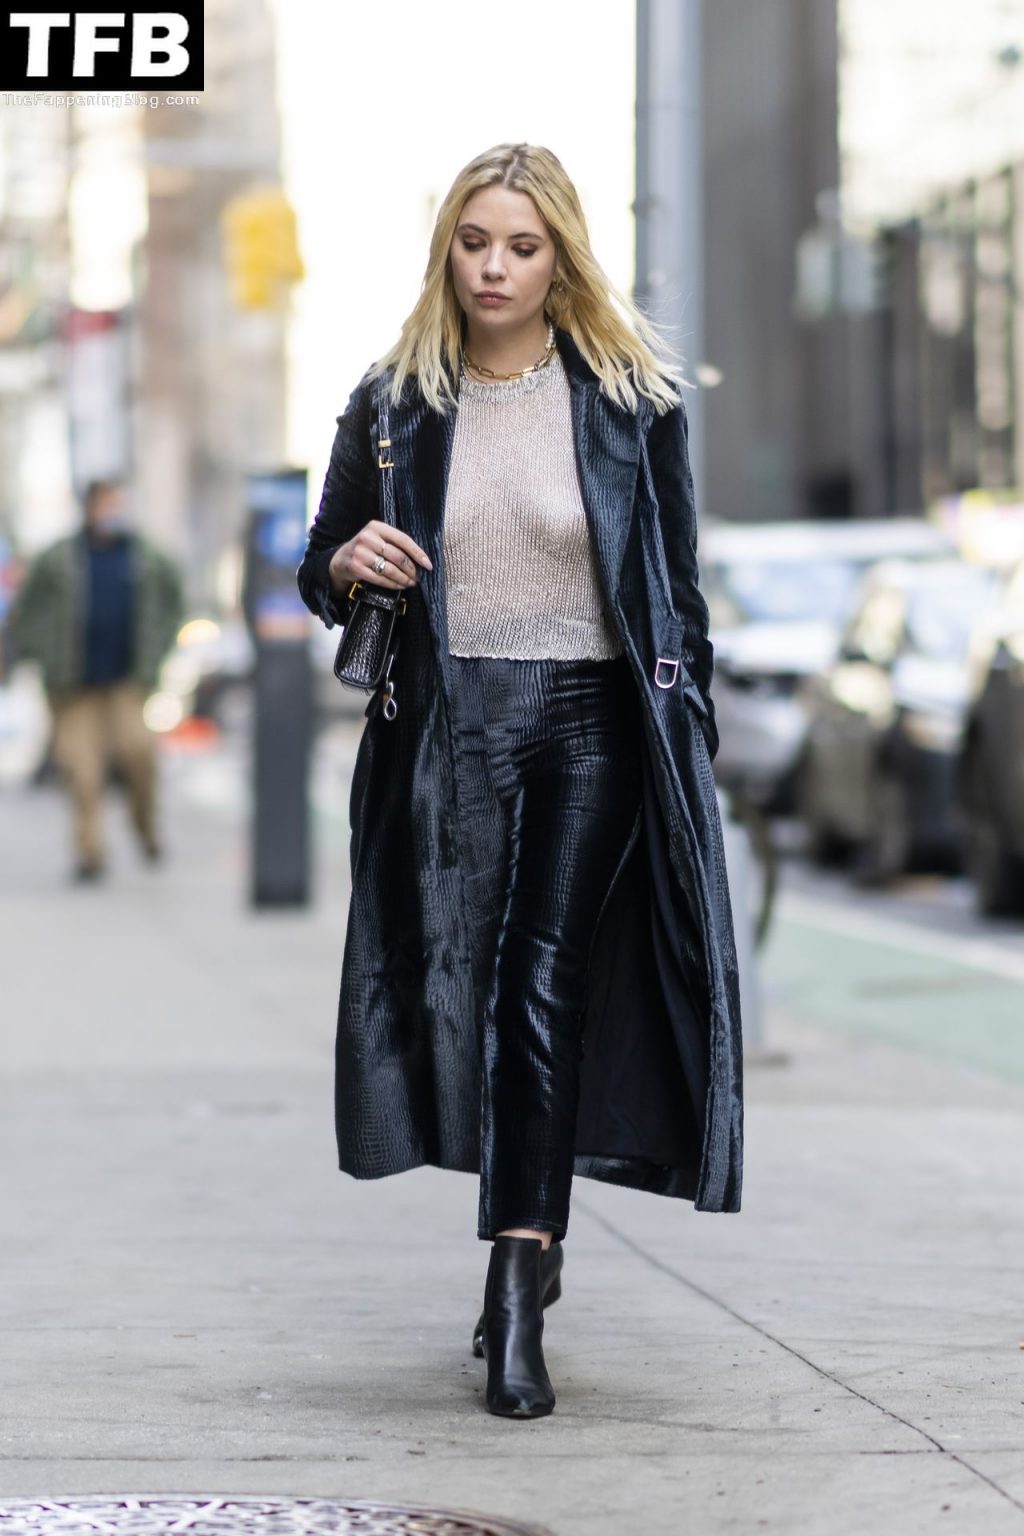 Ashley Benson Sexy The Fappening Blog 3 1 1024x1536 - Braless Ashley Benson Looks Stylish While Heading to a Meeting in NYC (20 Photos)